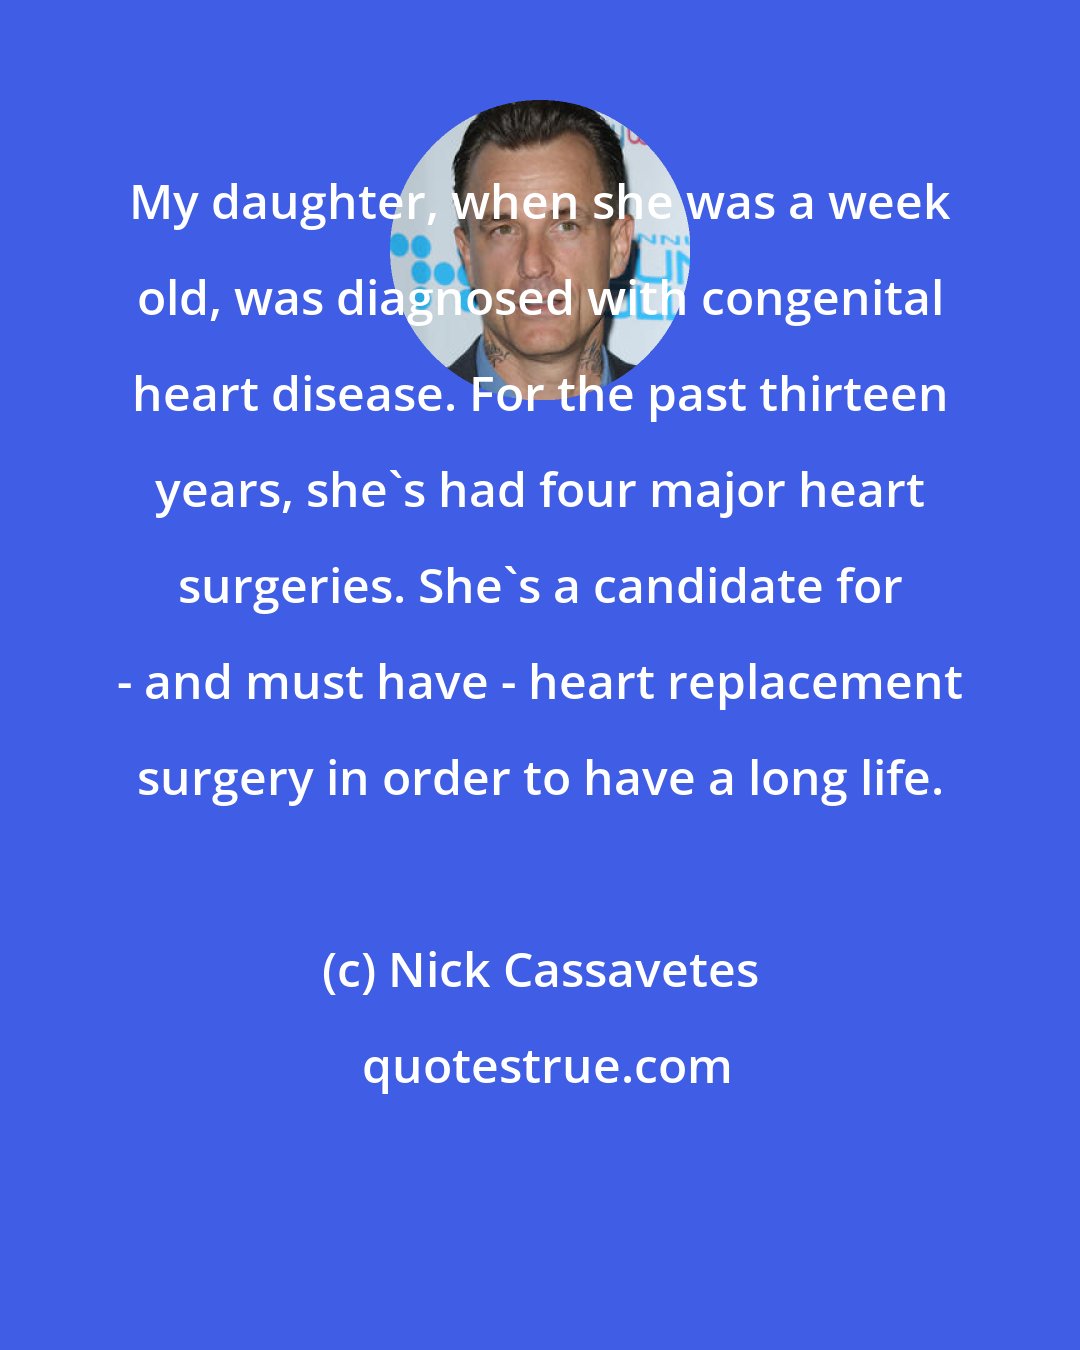 Nick Cassavetes: My daughter, when she was a week old, was diagnosed with congenital heart disease. For the past thirteen years, she's had four major heart surgeries. She's a candidate for - and must have - heart replacement surgery in order to have a long life.